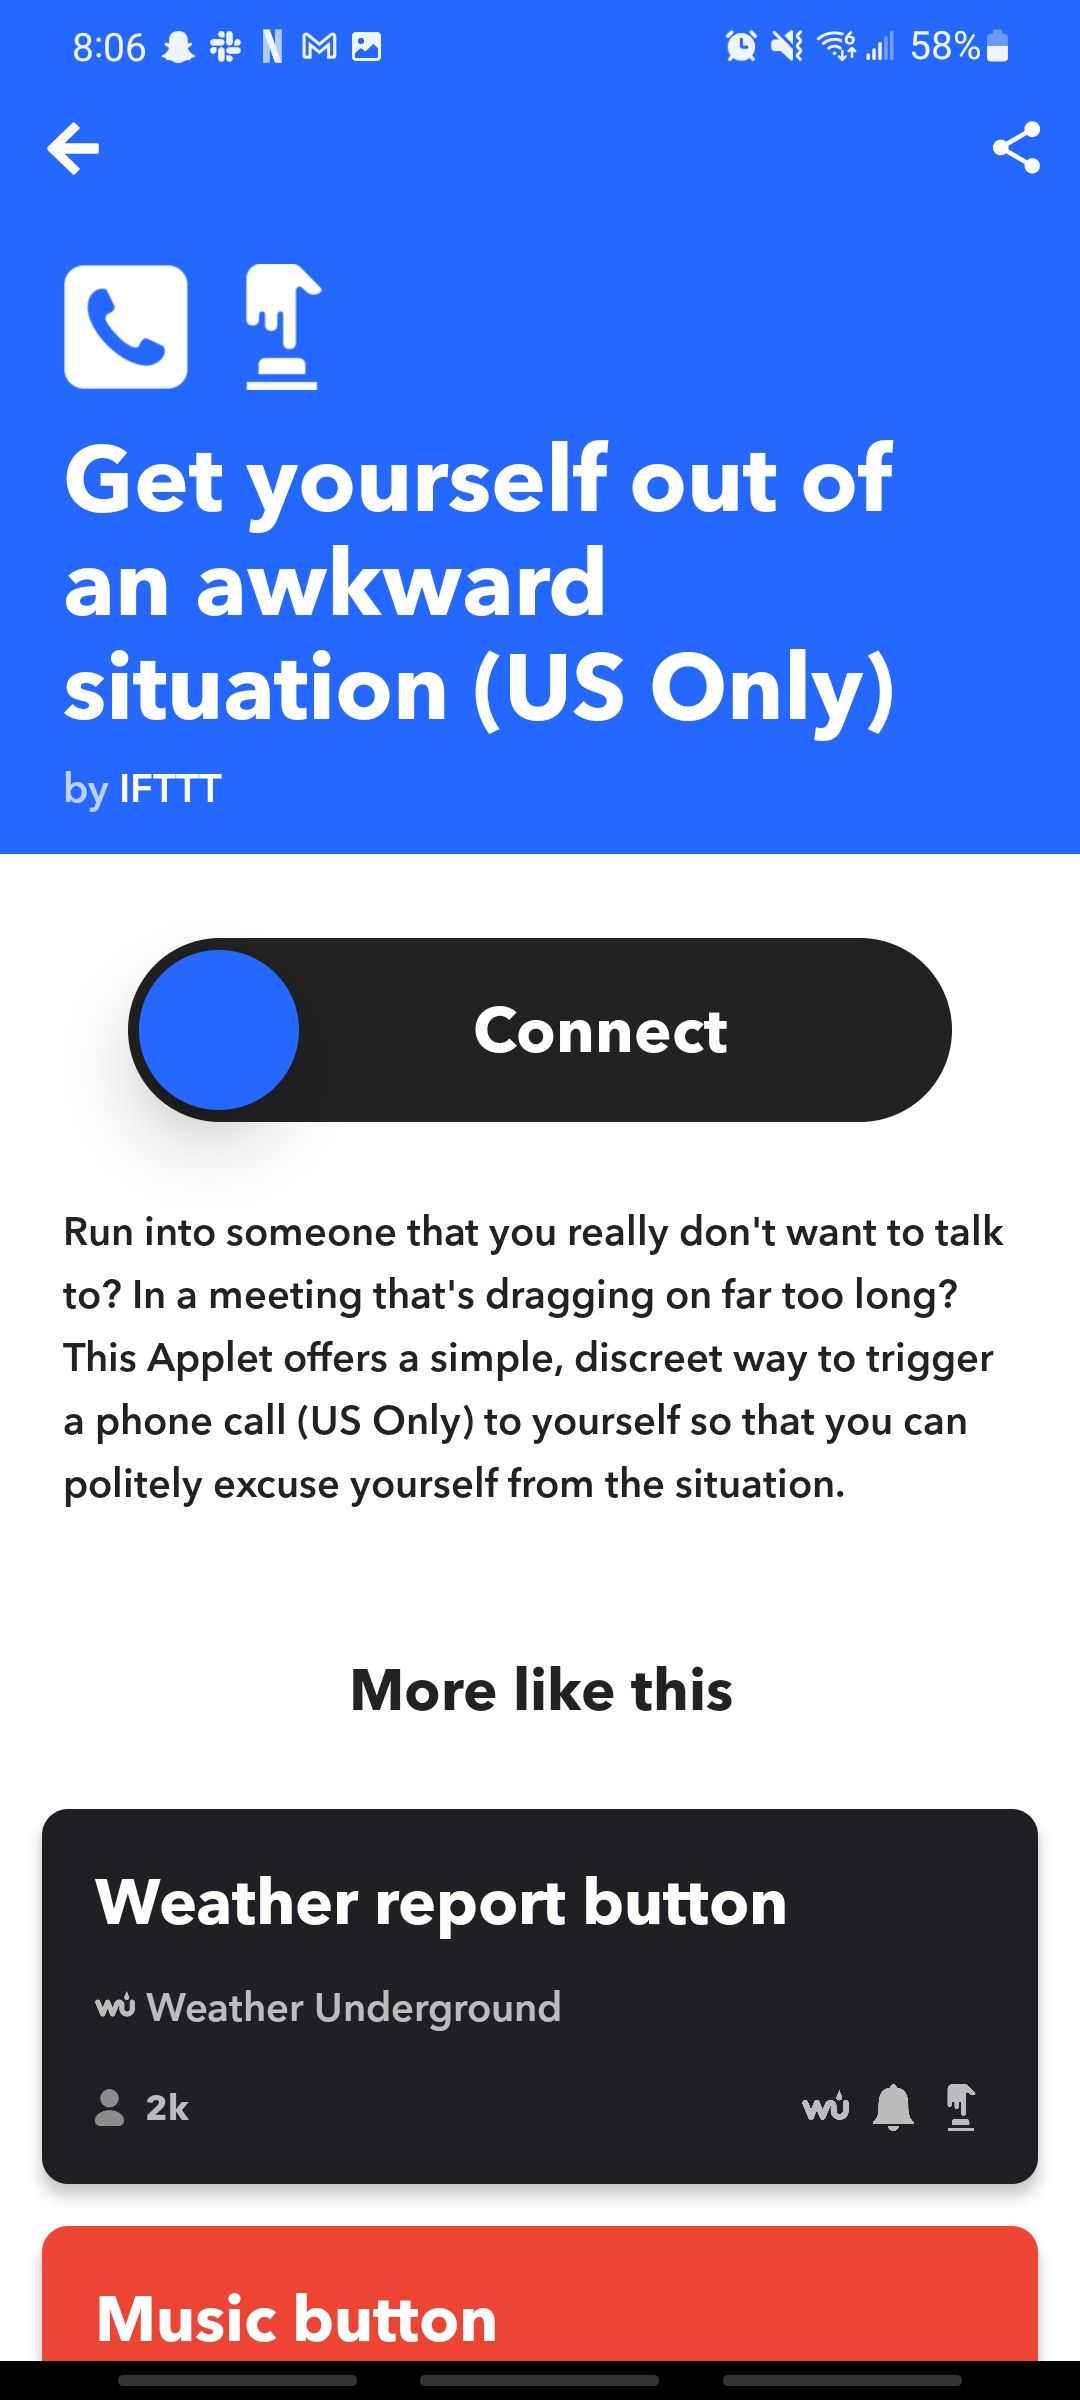 IFTTT app command for getting yourself out of an awkward situation